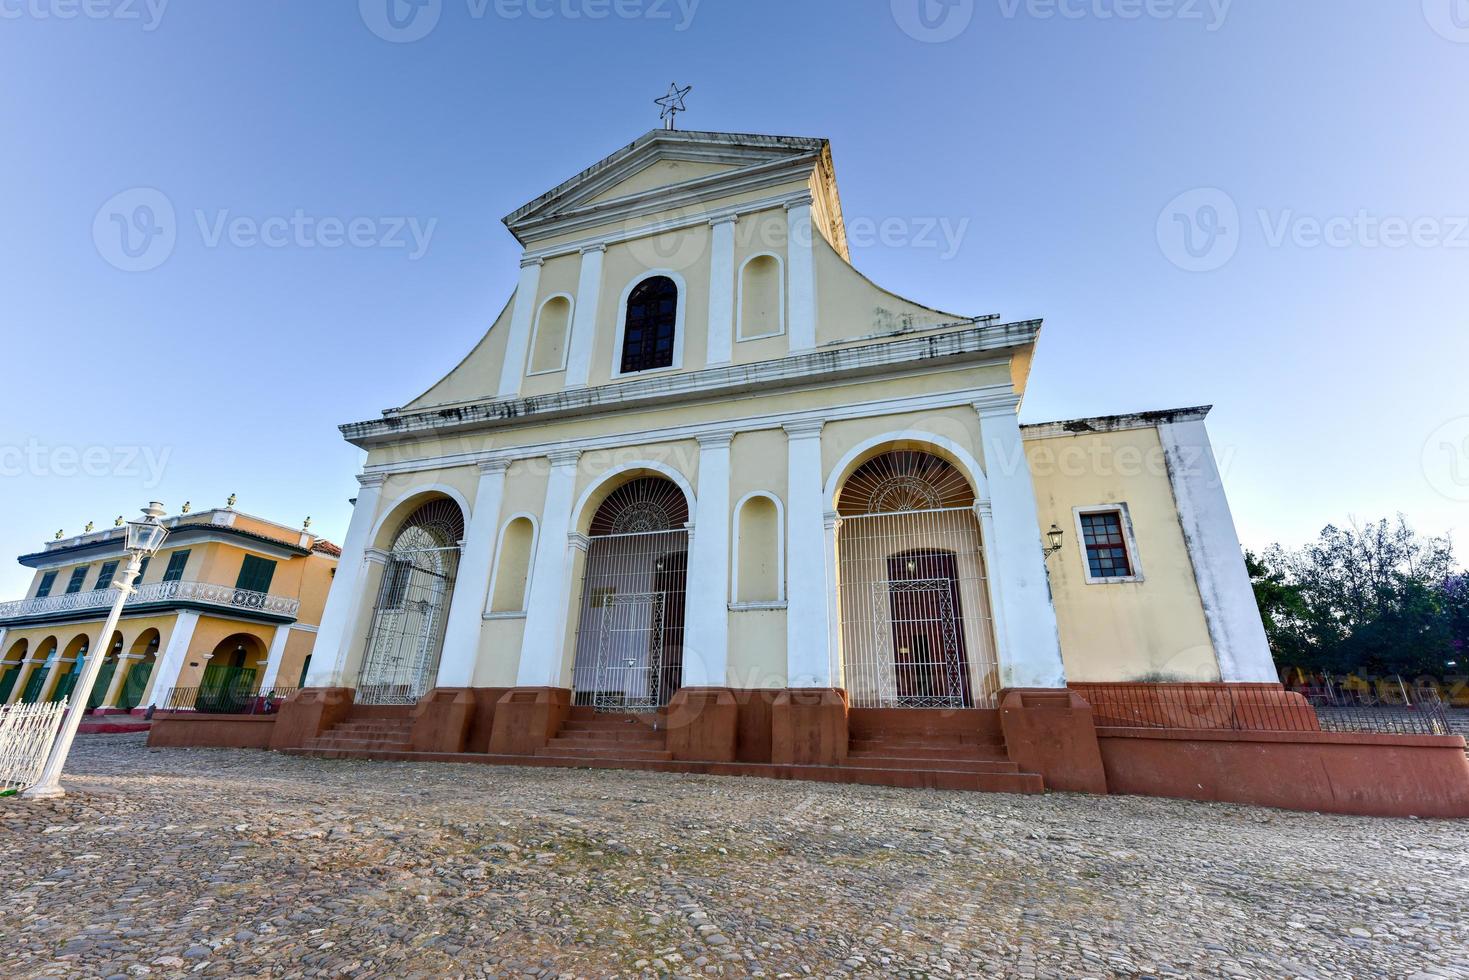 Holy Trinity Church in Trinidad, Cuba. The church has a Neoclassical facade and is visited by thousands of tourists every year. photo